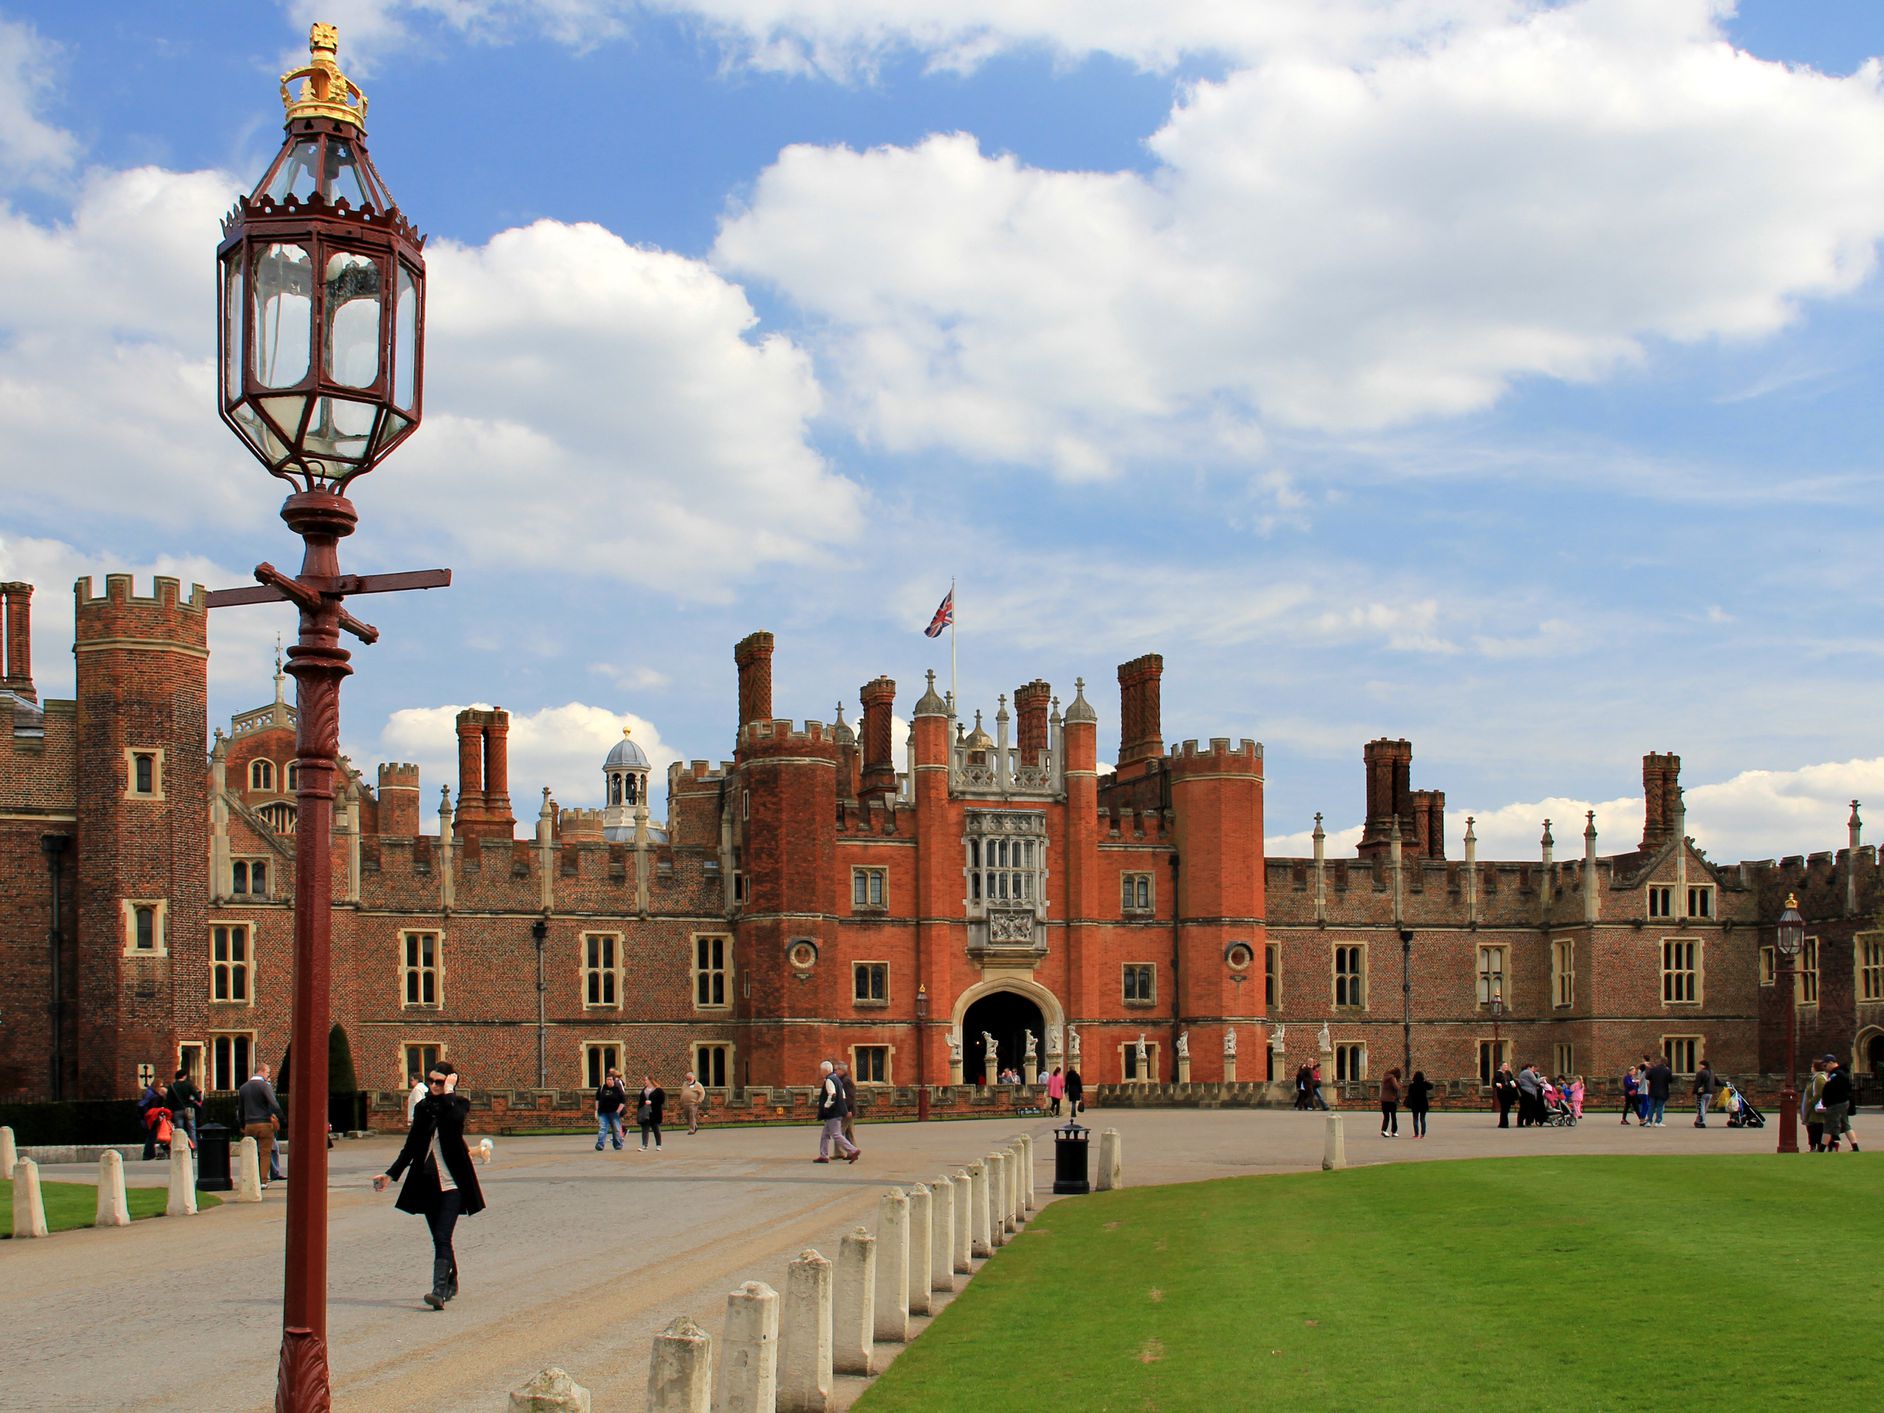 HamptonCourtPalace-ad22caf8dcac48a3a027c285c11248c5